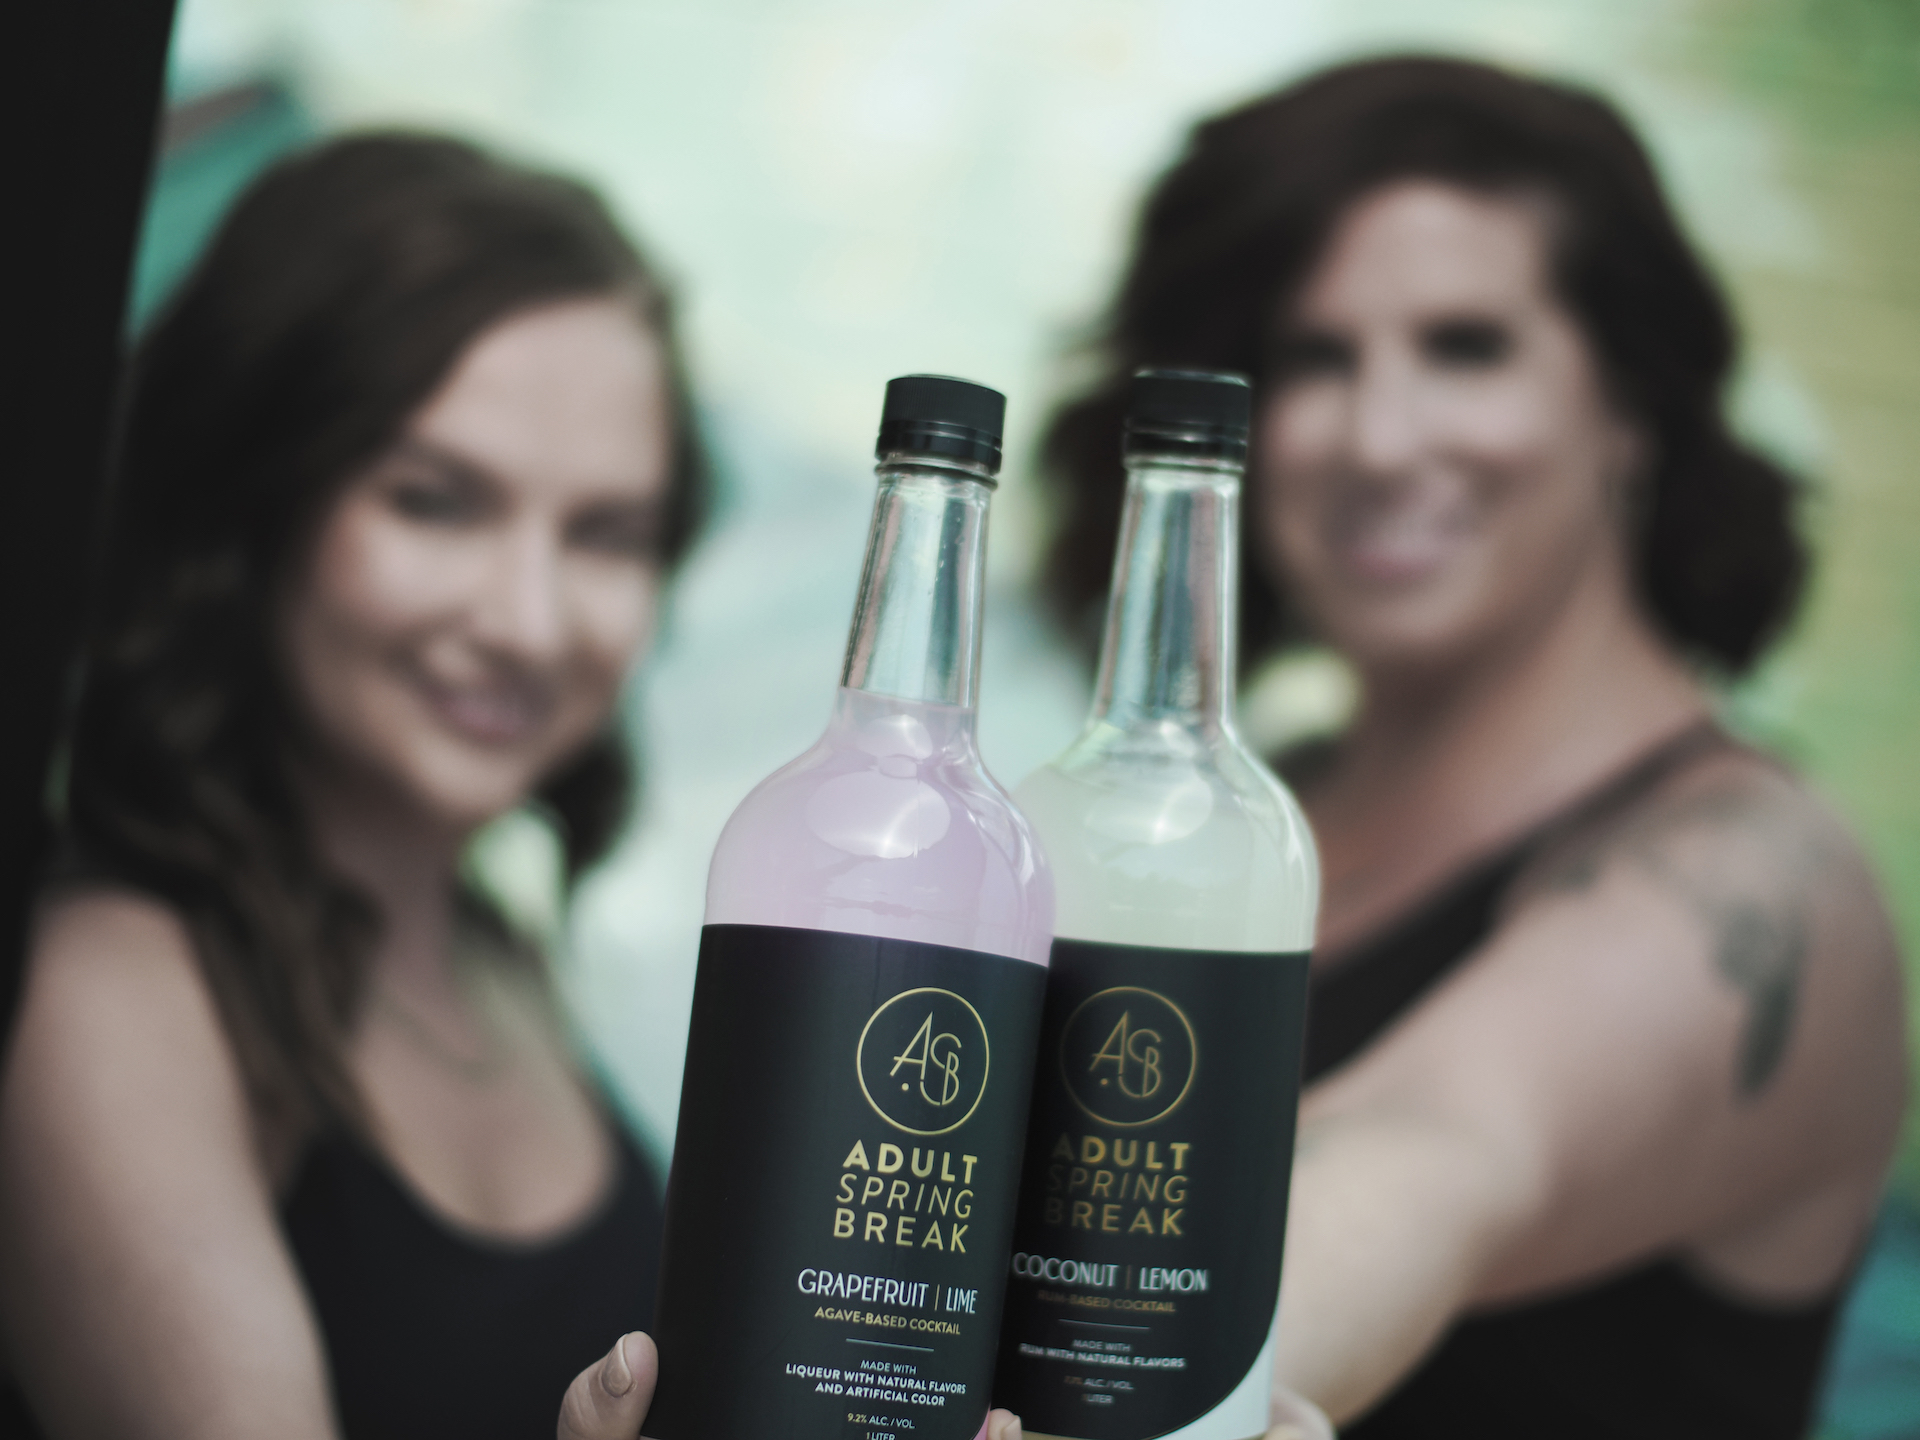 Founders Kendall and Casey out of focus holding two Adult Spring Break bottles in focus. 